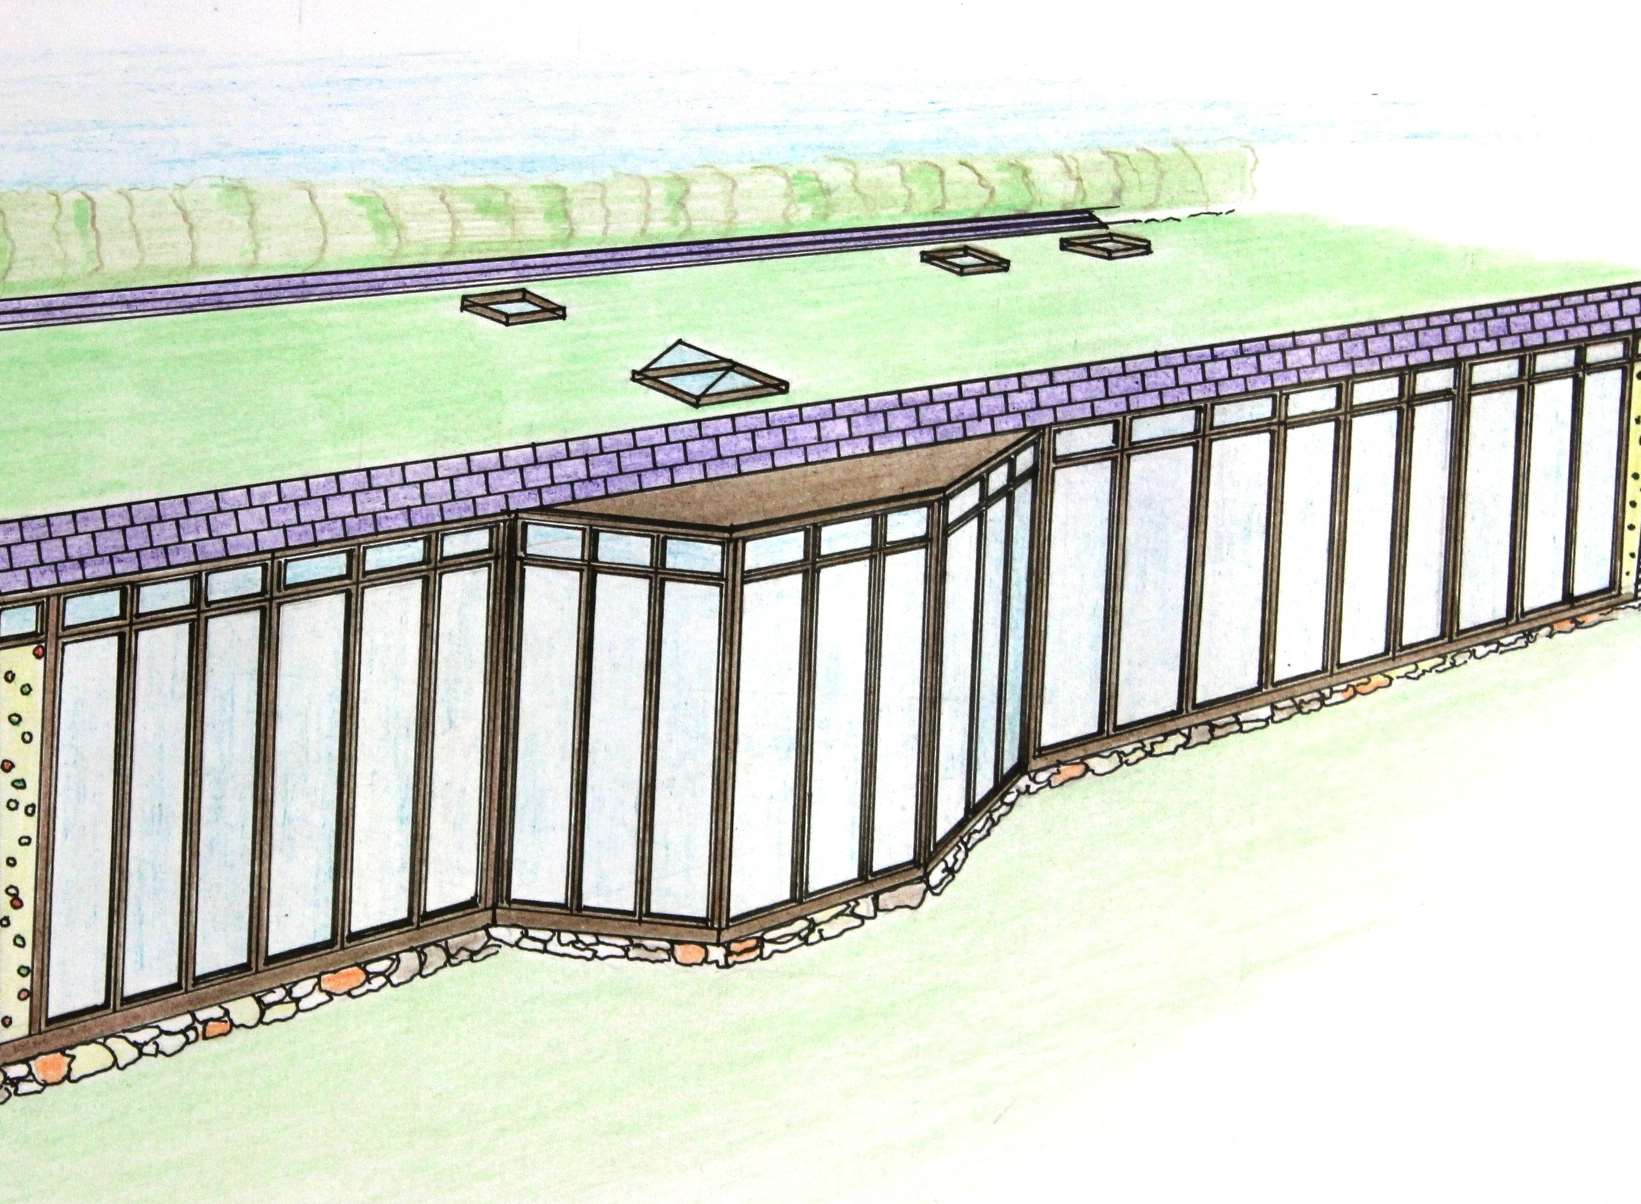 Sav's artist's impression of what the house will look like when finished